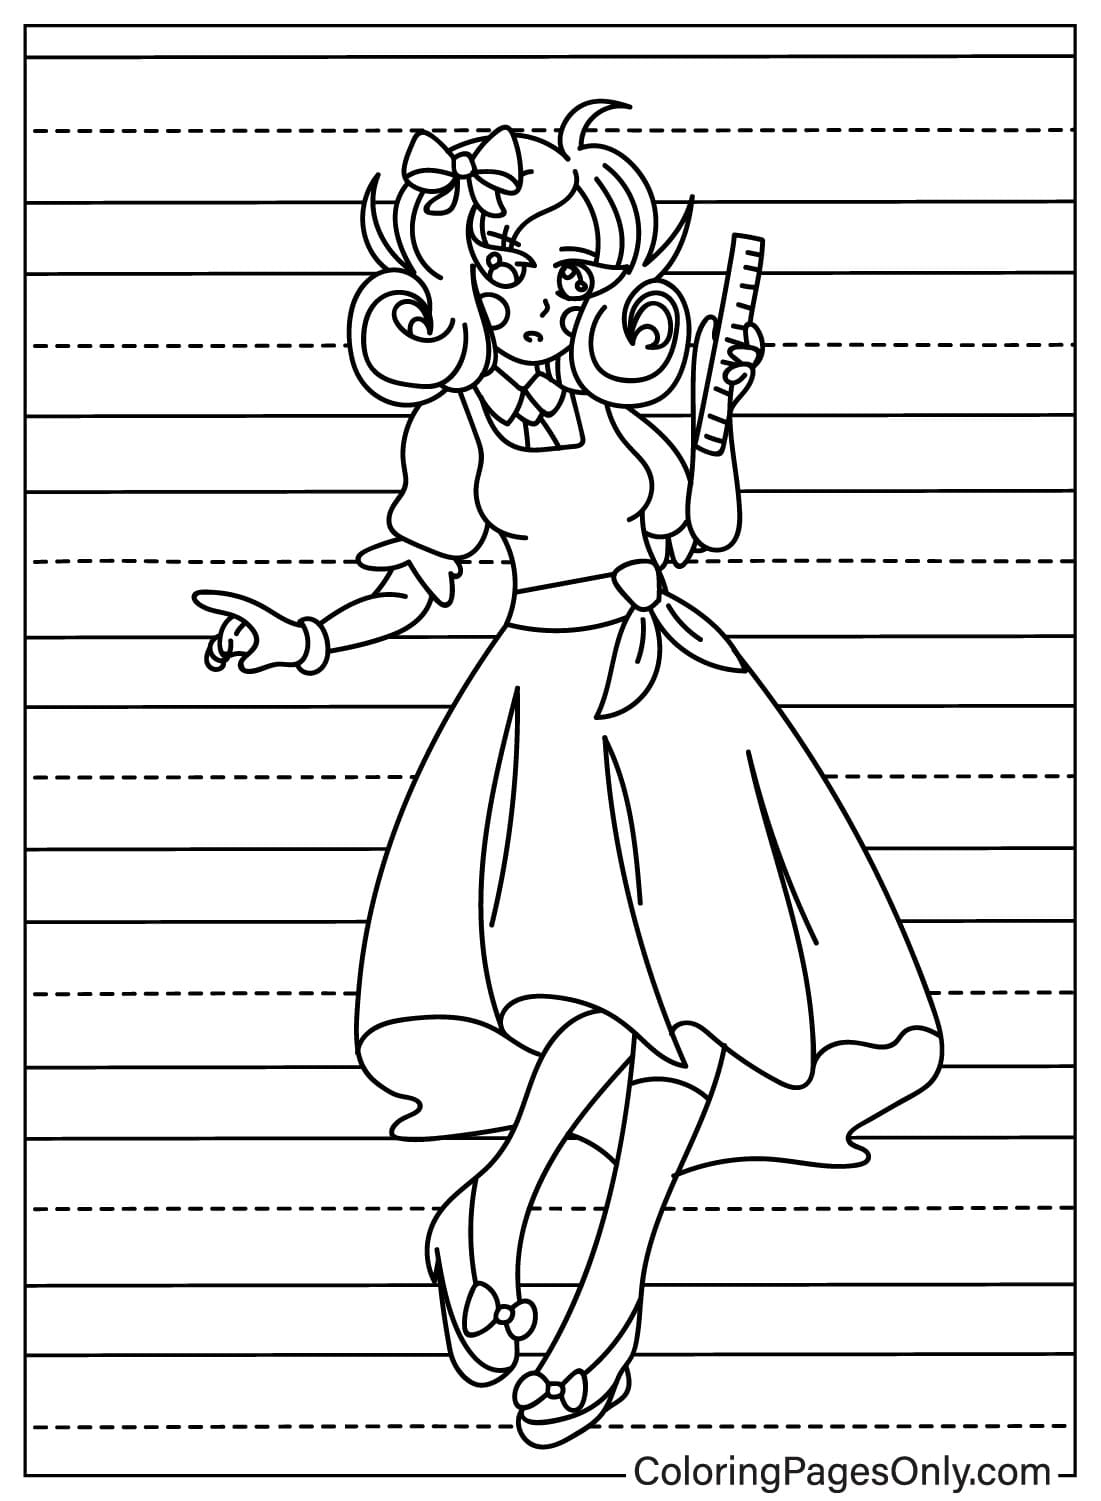 Free Printable Miss Delight Coloring Page from Miss Delight